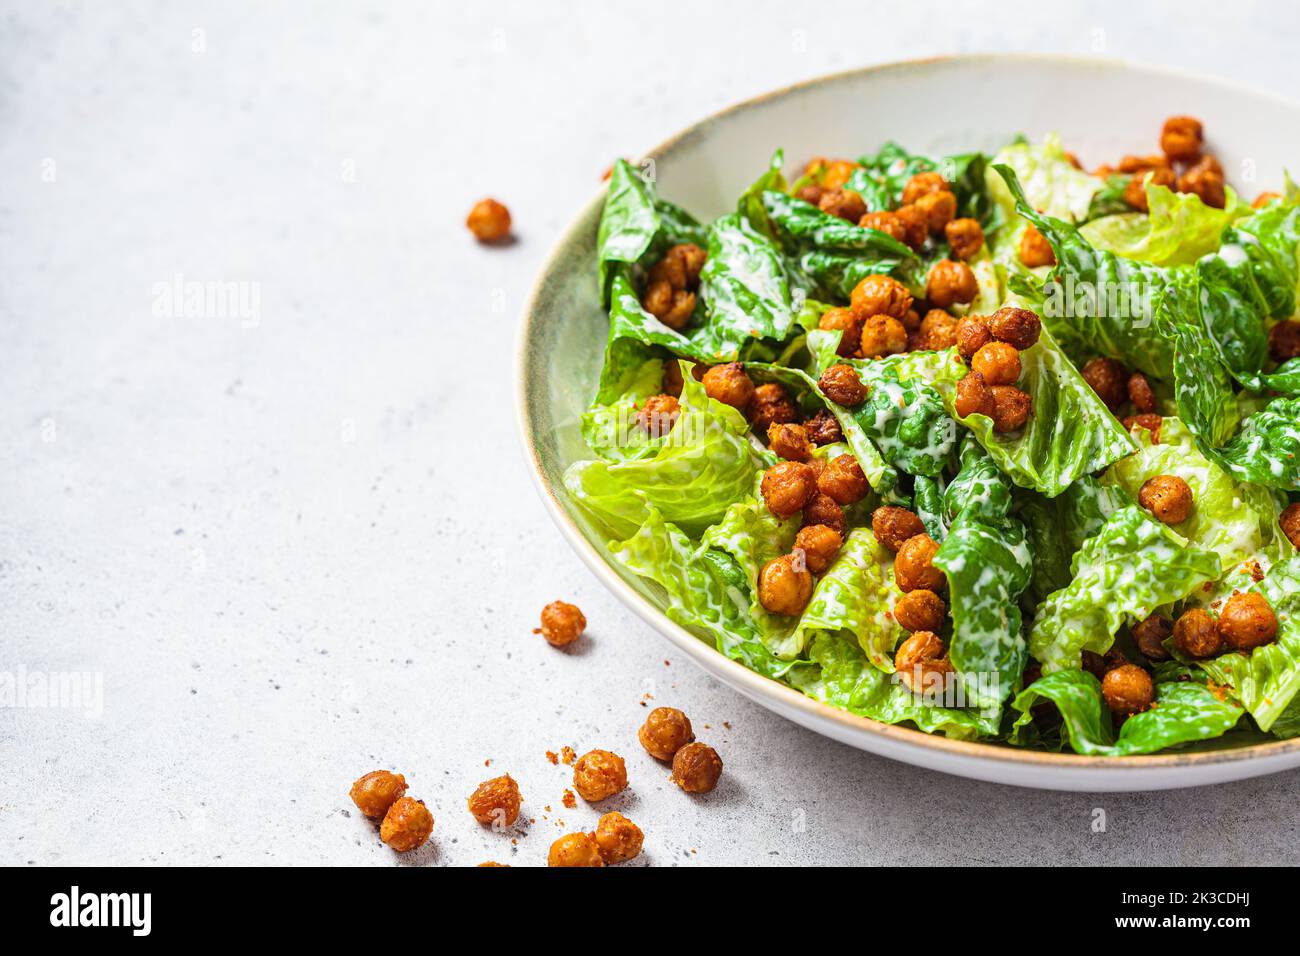 Vegan caesar salad with fried spicy chickpeas in a gray bowl, copy space. Plant based food concept. Stock Photo